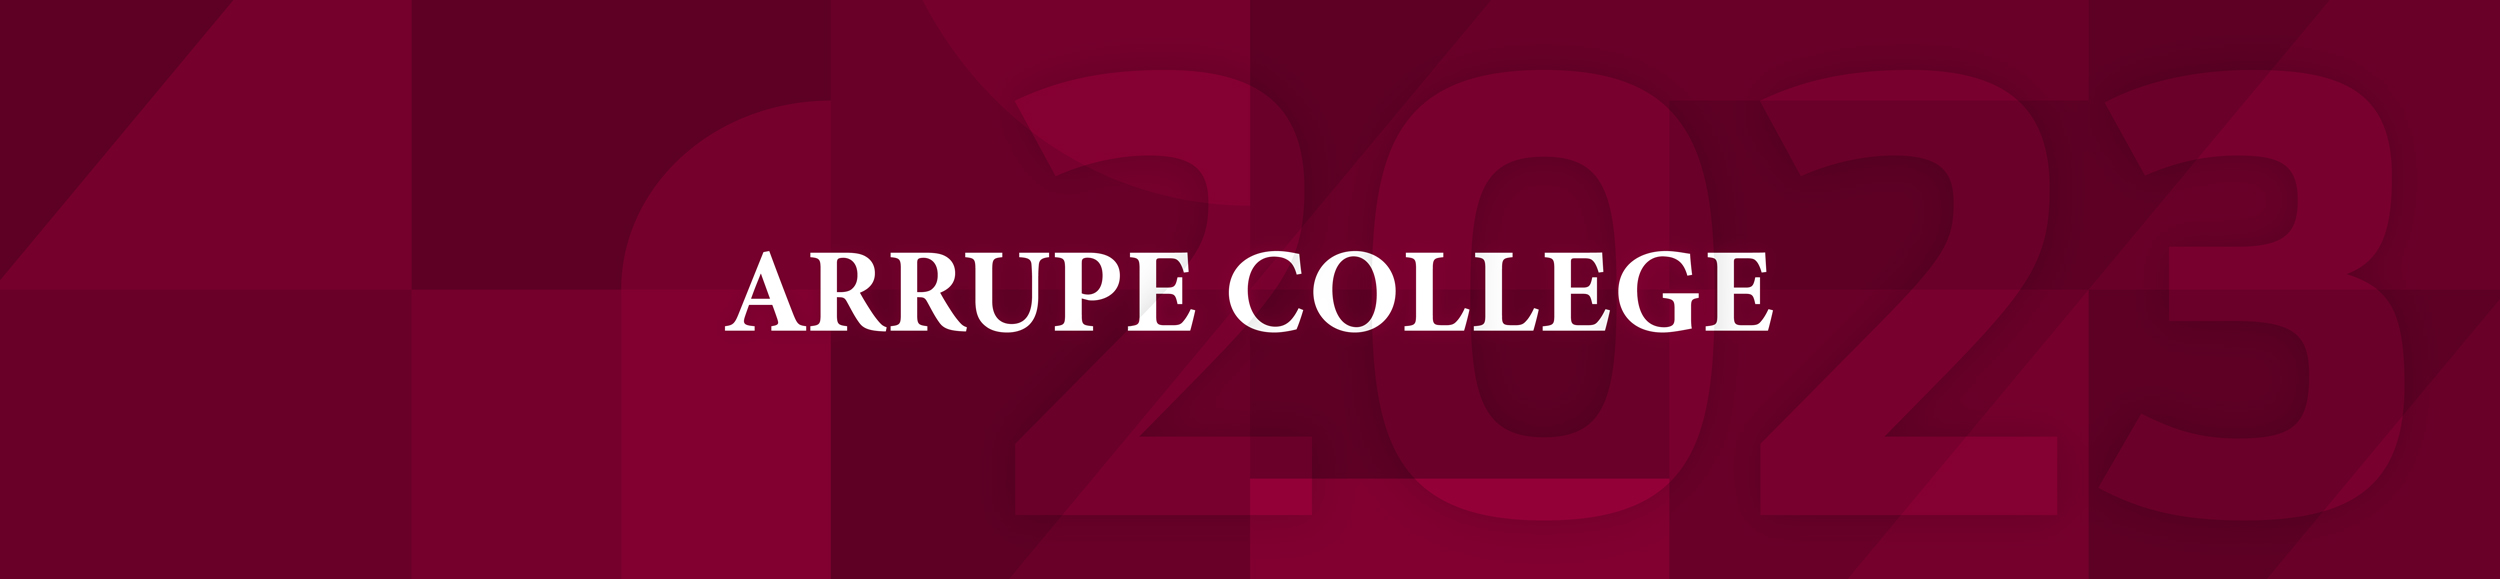 Arrupe College is a two-year college of Loyola University Chicago that continues the Jesuit tradition of offering a rigorous liberal arts education to a diverse population